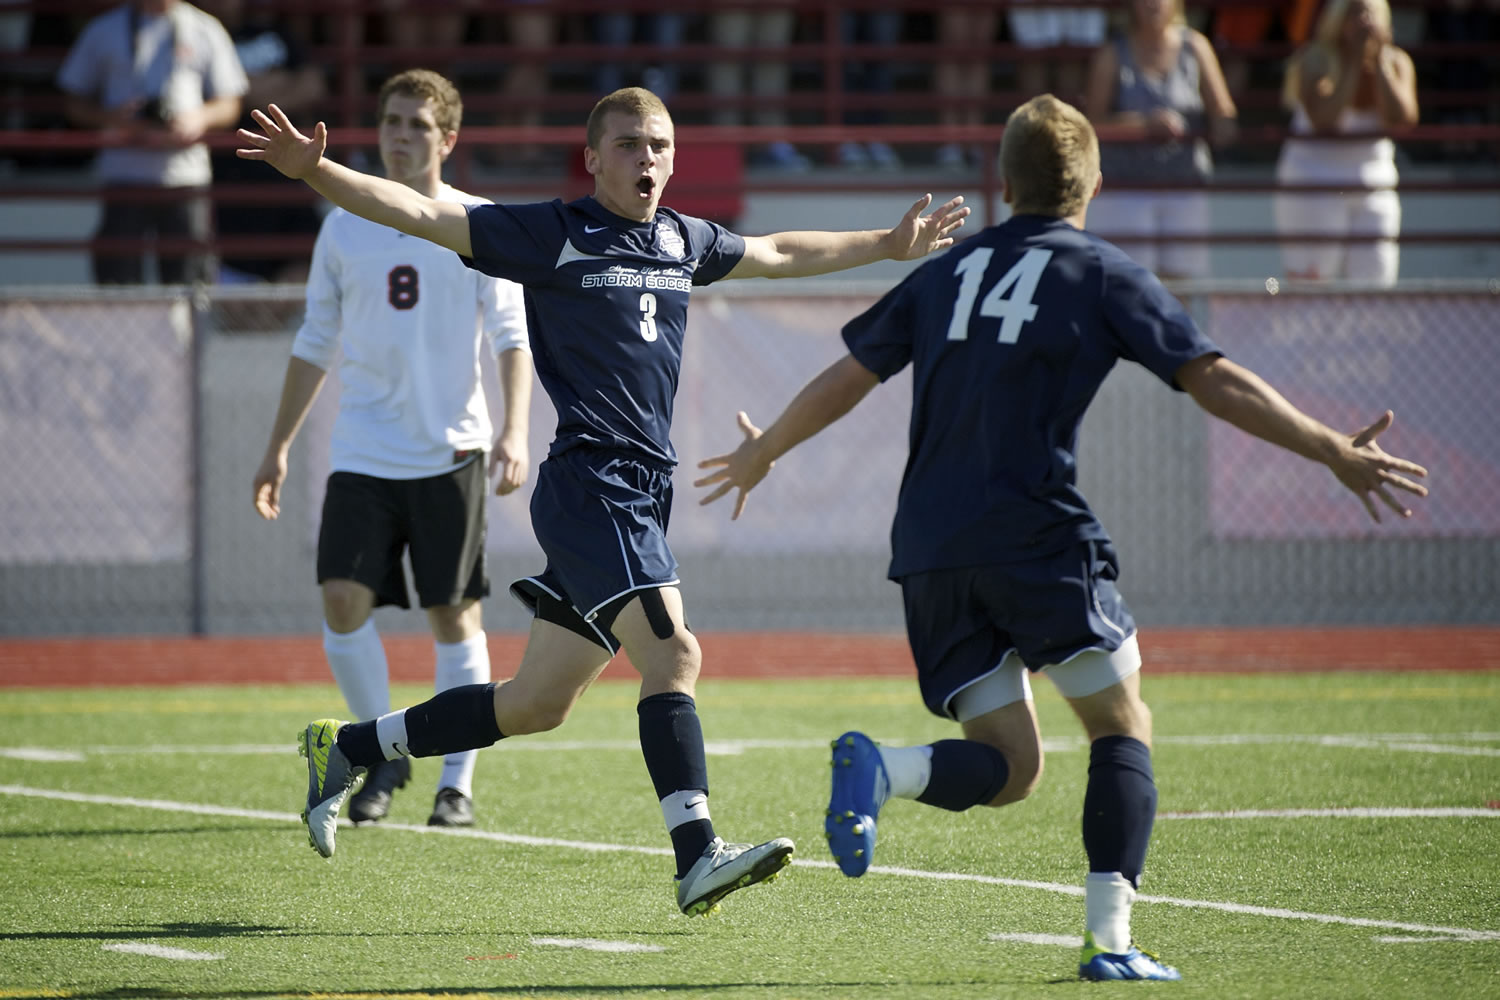 Carter Johnson, 14, and Austin Horner, 3, of Skyview High School celebrate a goal off a header during the first half against Central Kitsap in the boys 4A State Soccer Championship game Saturday May 26, 2012 at Carl Sparks Stadium in Puyallup, Washington. Horner set up the goal as Johnson scored from the pass. Skyview beat Central Kitsap 3-2.